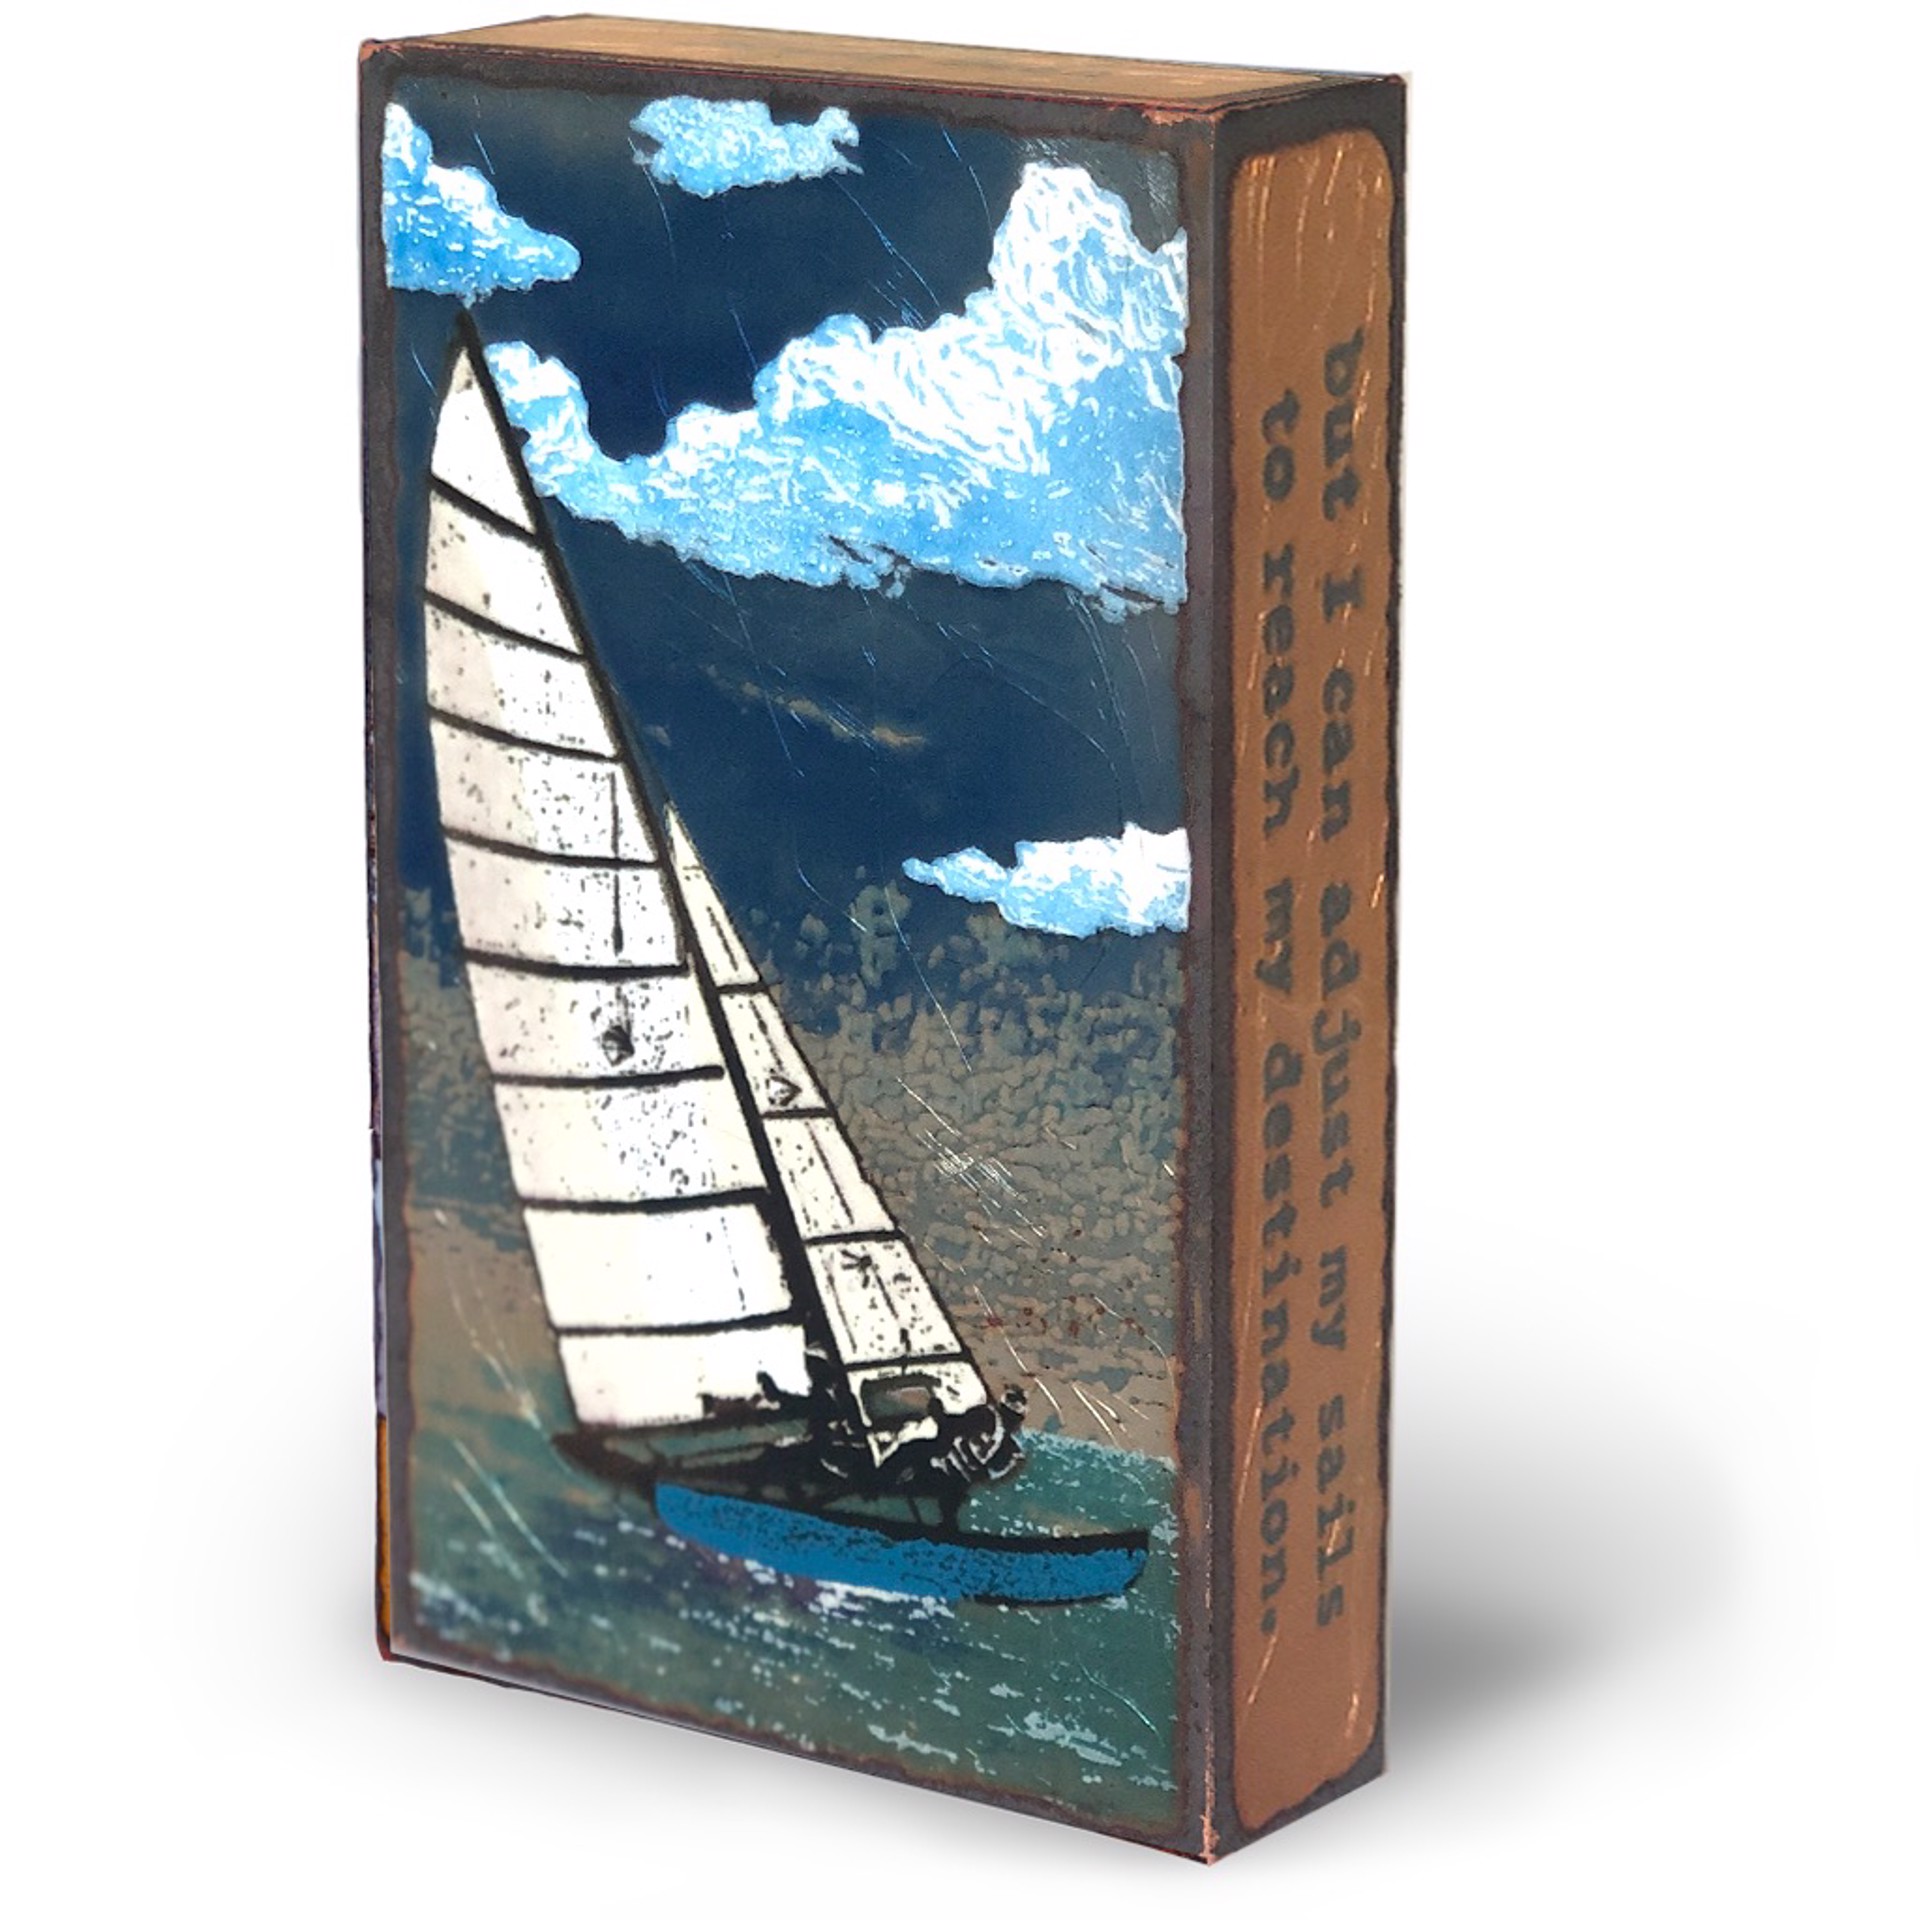 Hand Made Glass Fired To Copper By Houston Llew Featuring Sailboat And Meaningful Quote, Available At Gallery Wild